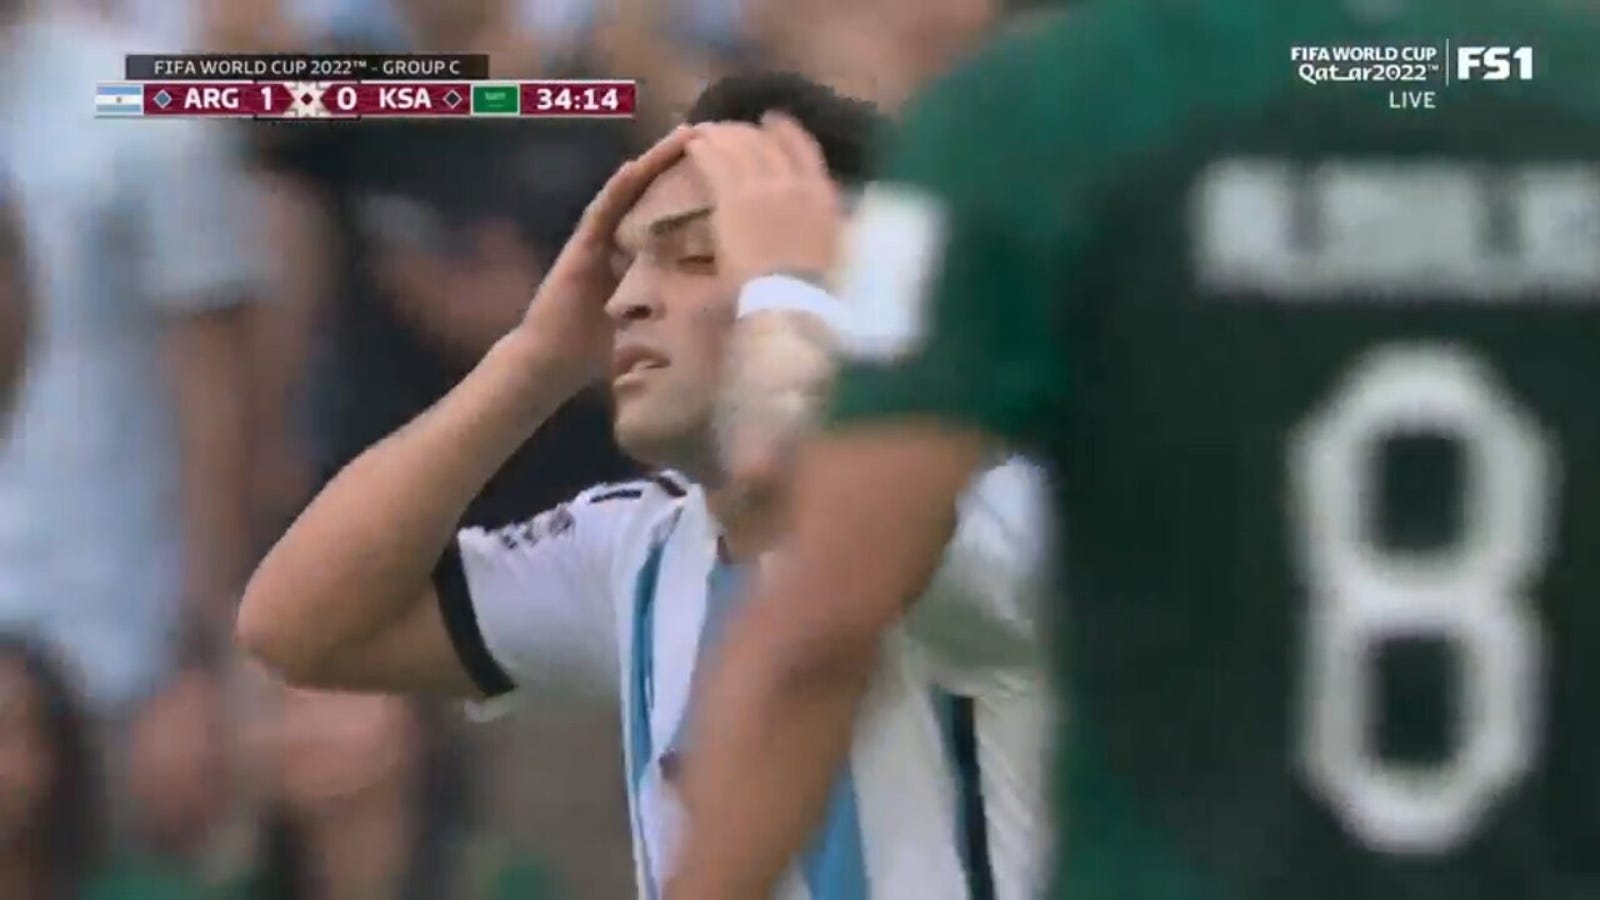 Argentina was sidelined a total of seven times in the first half vs.  Saudi Arabia